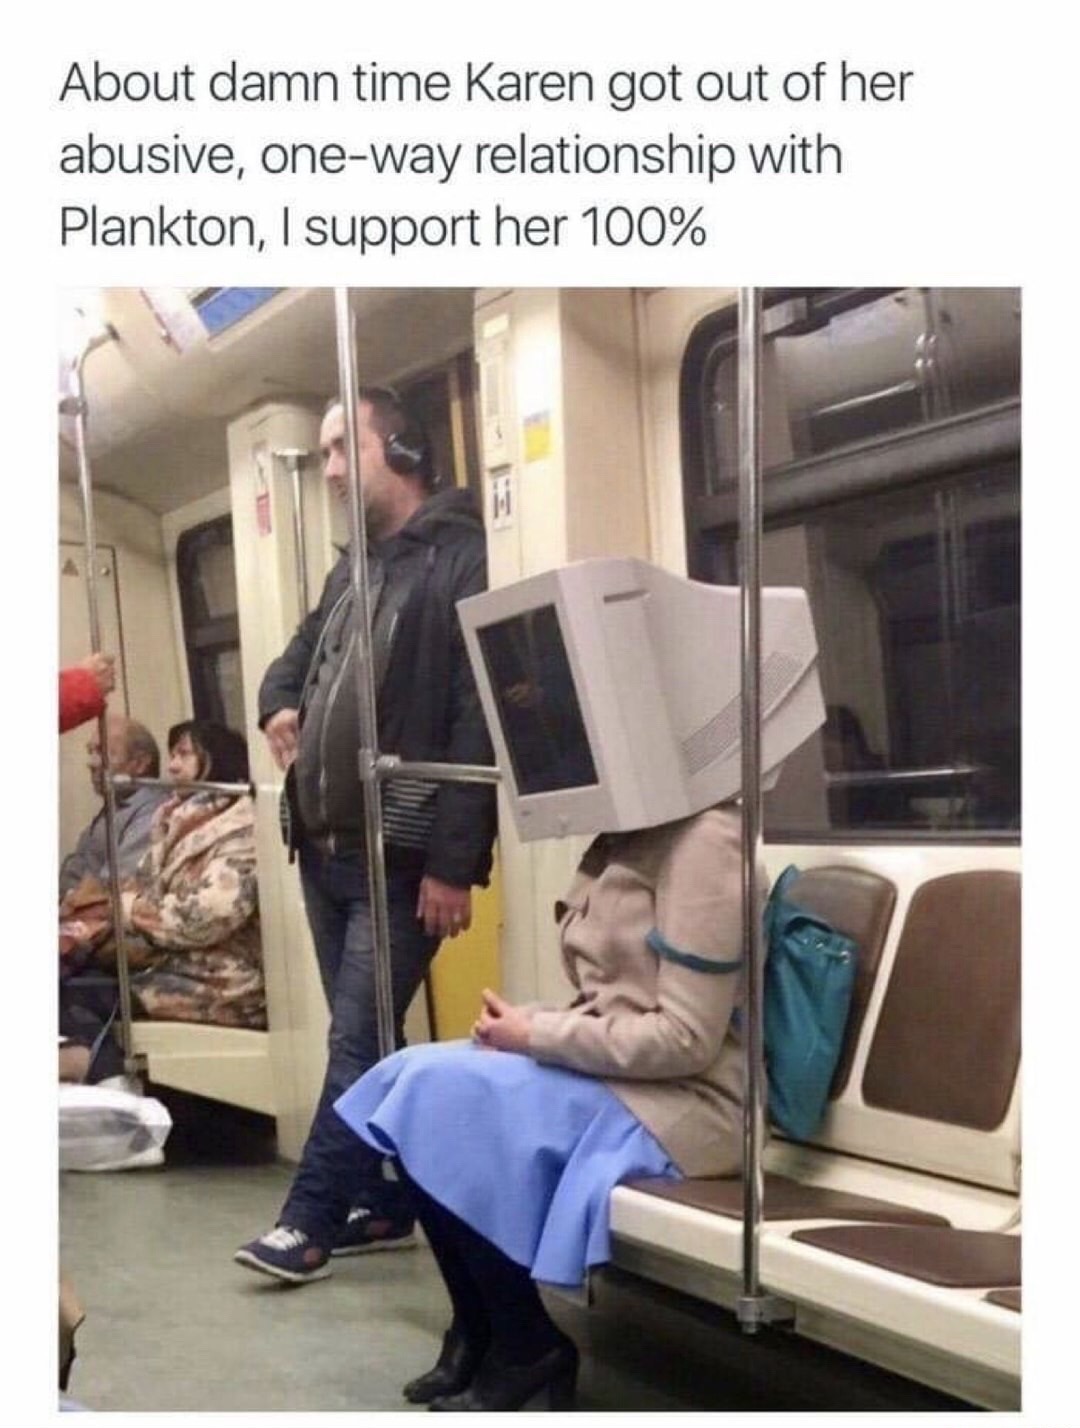 crazy people on subway - About damn time Karen got out of her abusive, oneway relationship with Plankton, I support her 100% 3